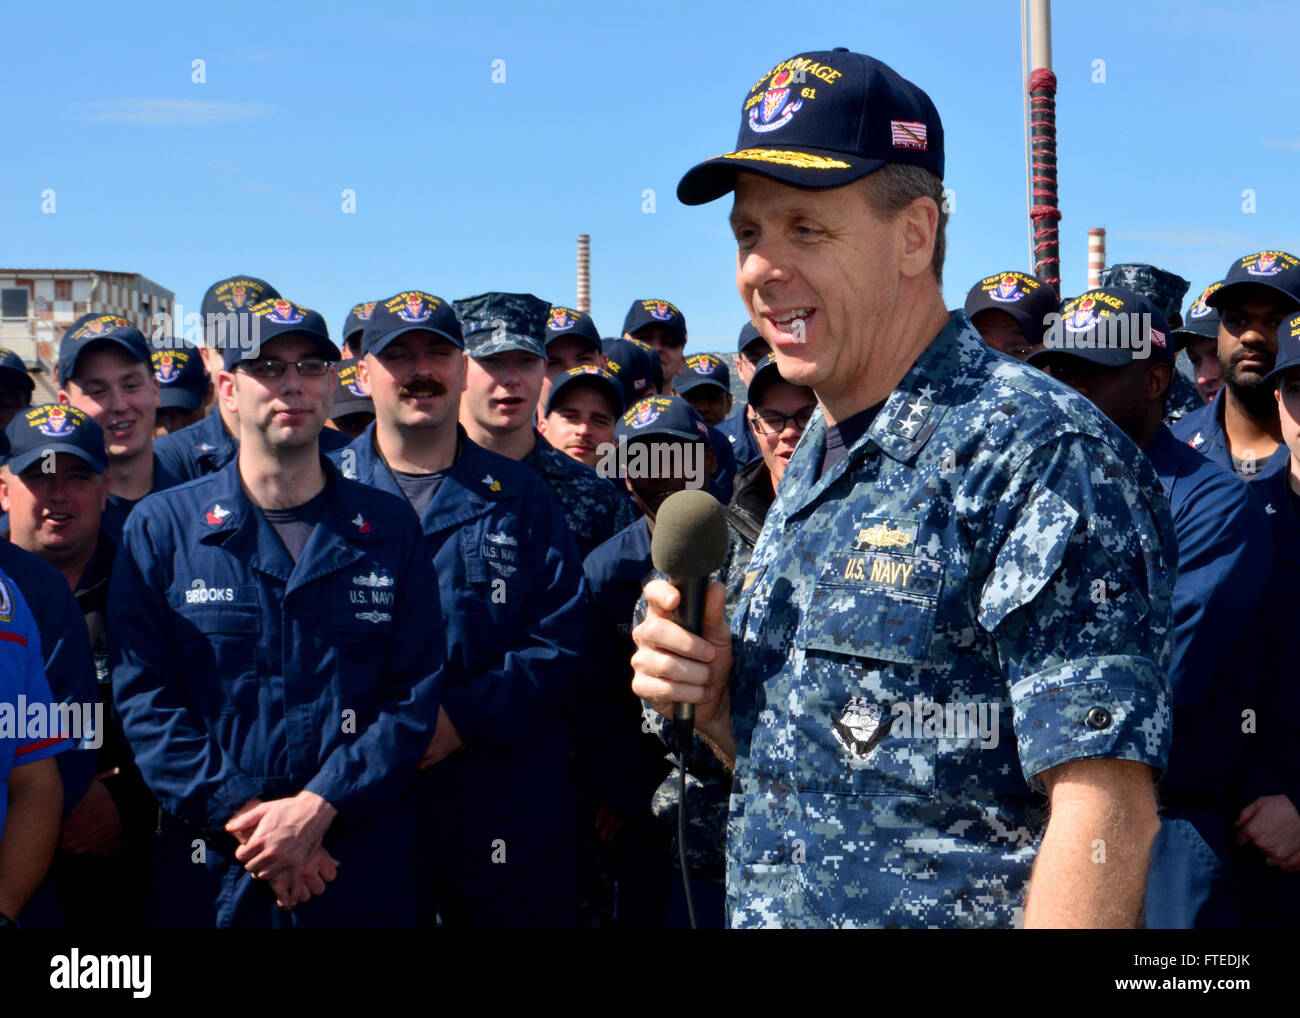 140417-N-ZZ999-001: AUGUSTA BAY, Italy (April 17, 2014) - Vice Adm. Phil Davidson, commander, U.S. 6th Fleet, addresses the crew during an all-hands call aboard the guided-missile destroyer USS Ramage (DDG 61). Ramage, homeported in Norfolk, Va., is on a scheduled deployment supporting maritime security operations and theater security cooperation efforts in the U.S. 6th Fleet area of operations. (U.S. Navy photo by Seaman Kenneth Moore/Released)   Join the conversation on Twitter ( https://twitter.com/naveur navaf )  follow us on Facebook ( https://www.facebook.com/USNavalForcesEuropeAfrica )  Stock Photo